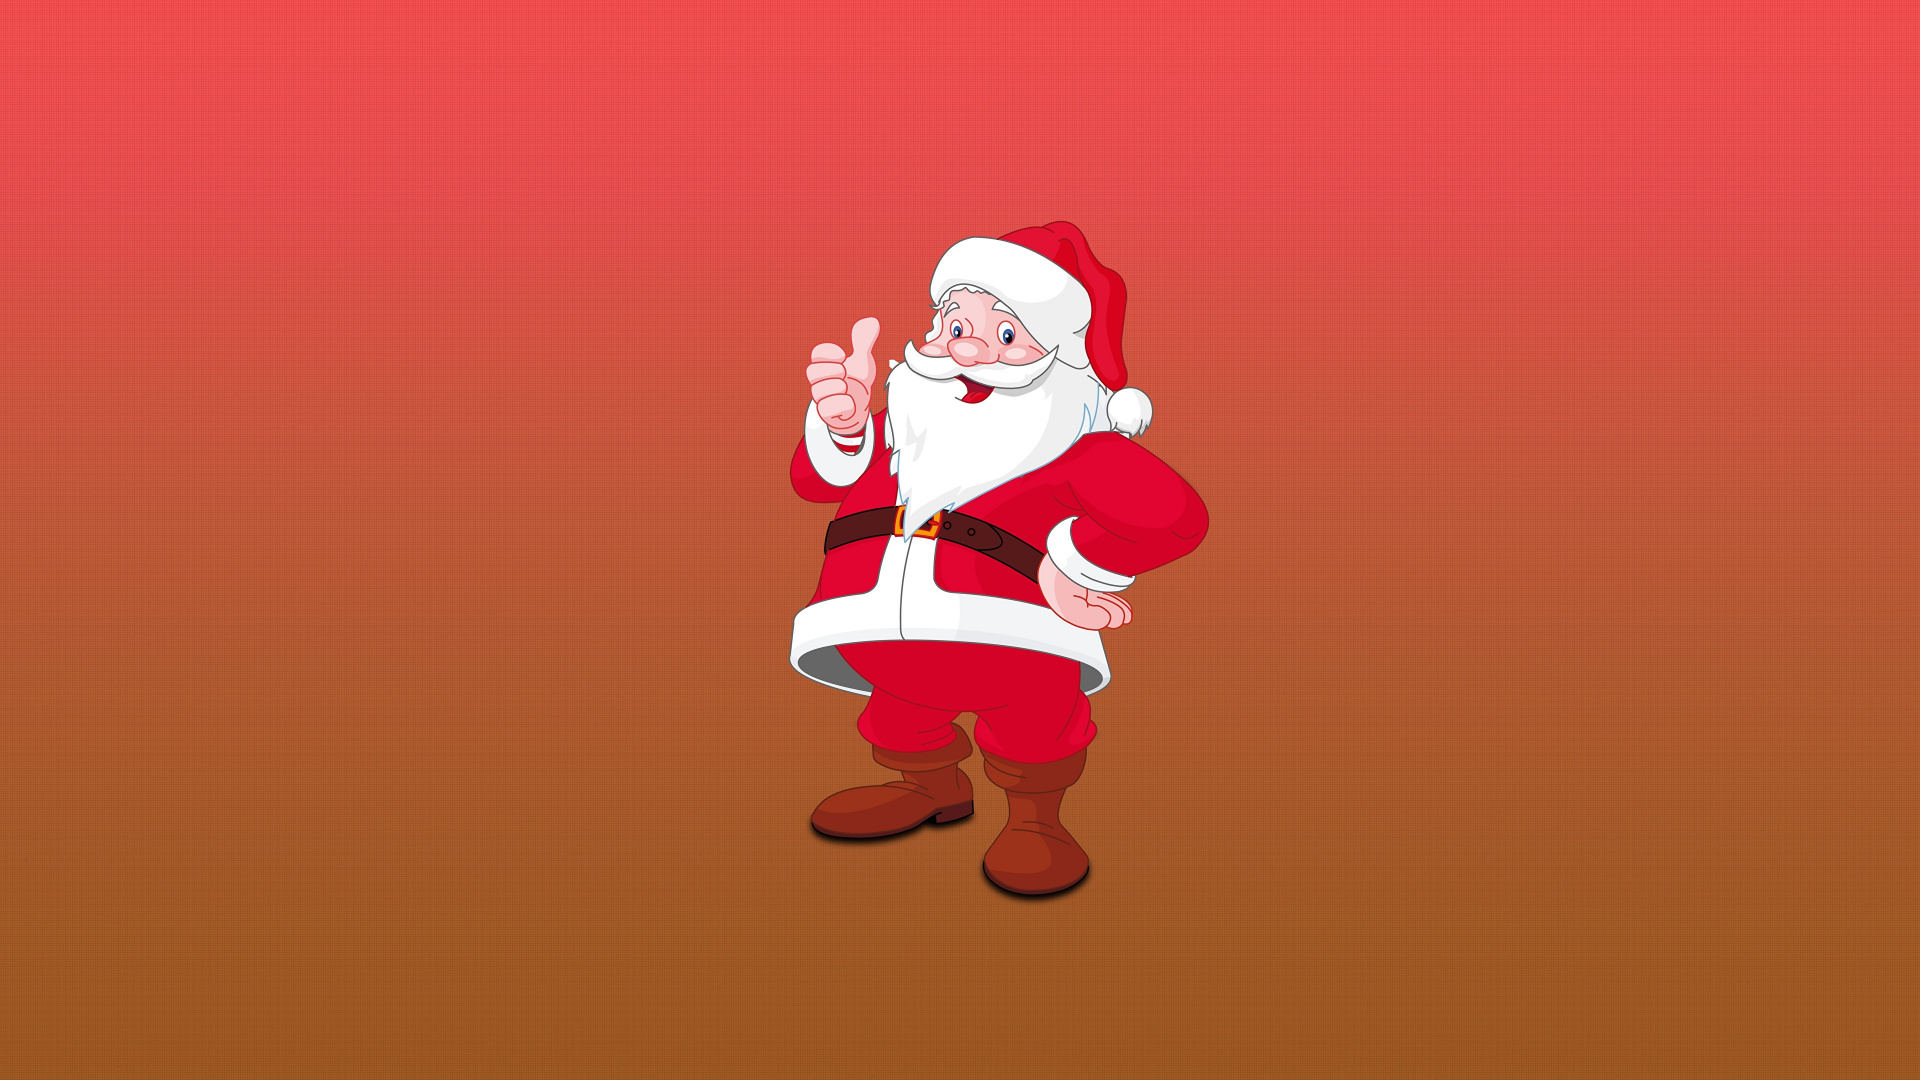 Santa Claus, Illustration, Ded Moroz, Christmas Day, Red. Wallpaper in 1920x1080 Resolution